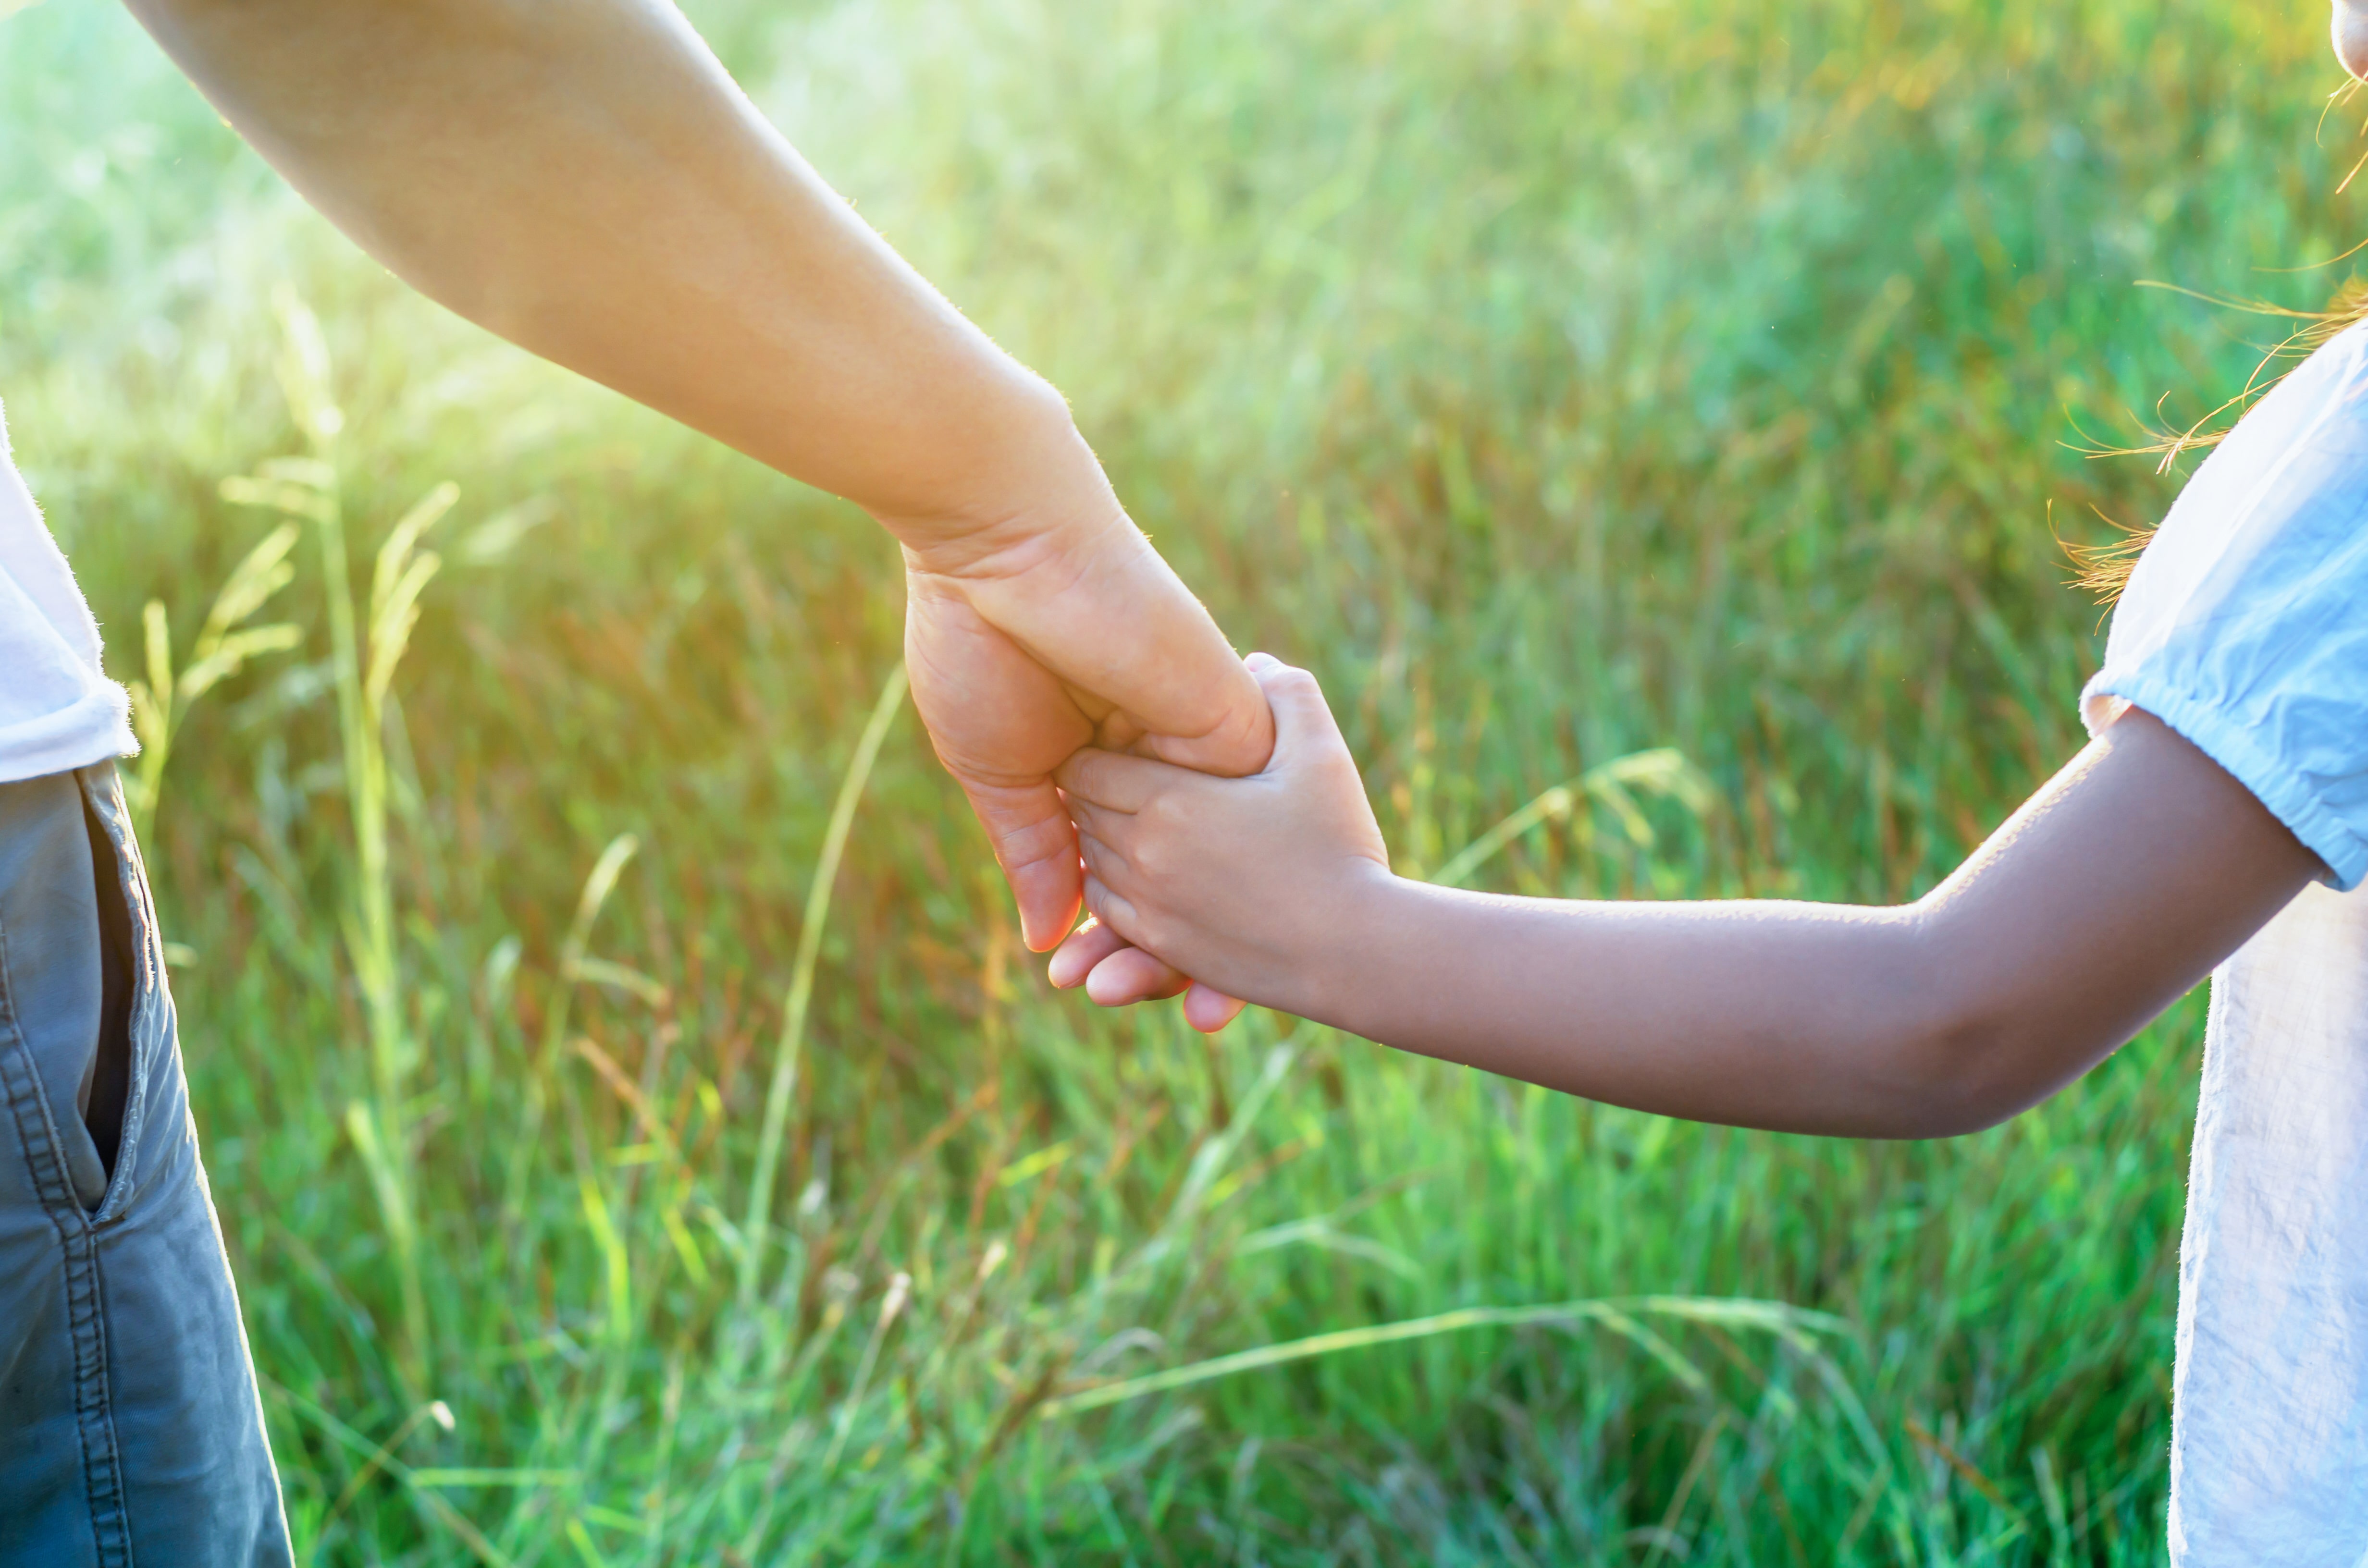 Do I Have to Pay Child Support if I Have Joint Custody?